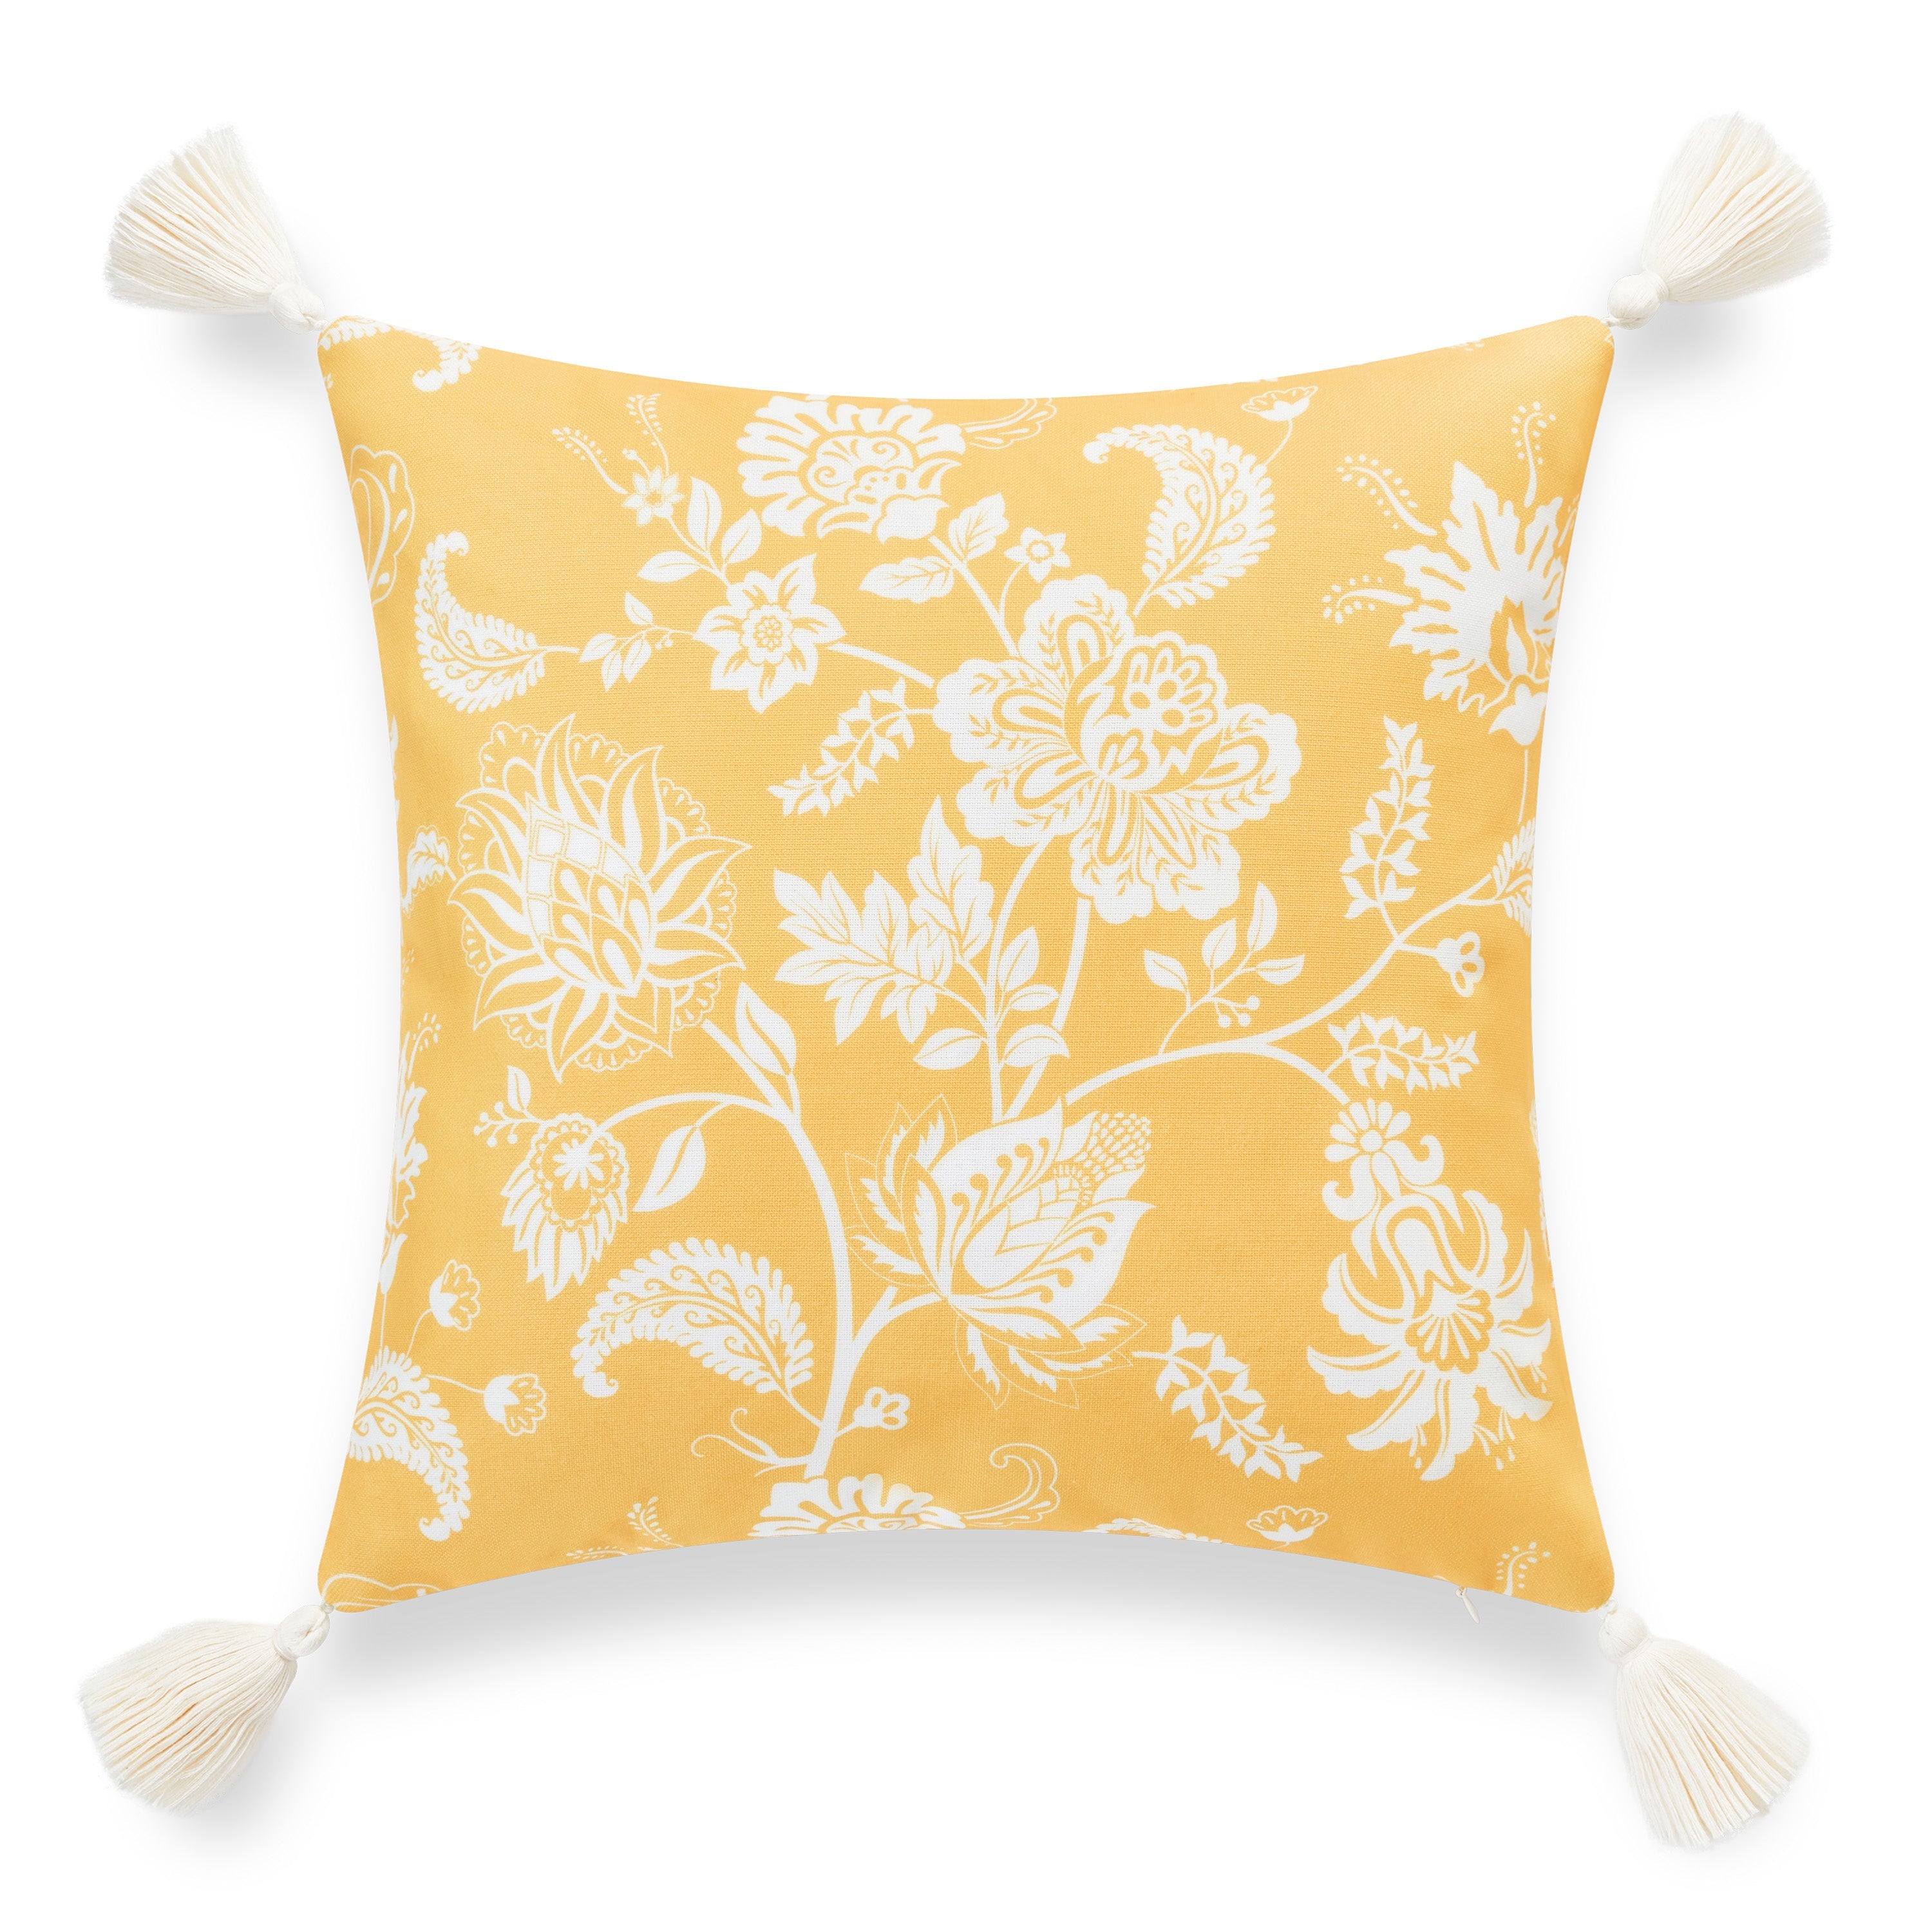 Coastal Indoor Outdoor Throw Pillow Cover, Floral Tassel, Pale Yellow, 18"x18"